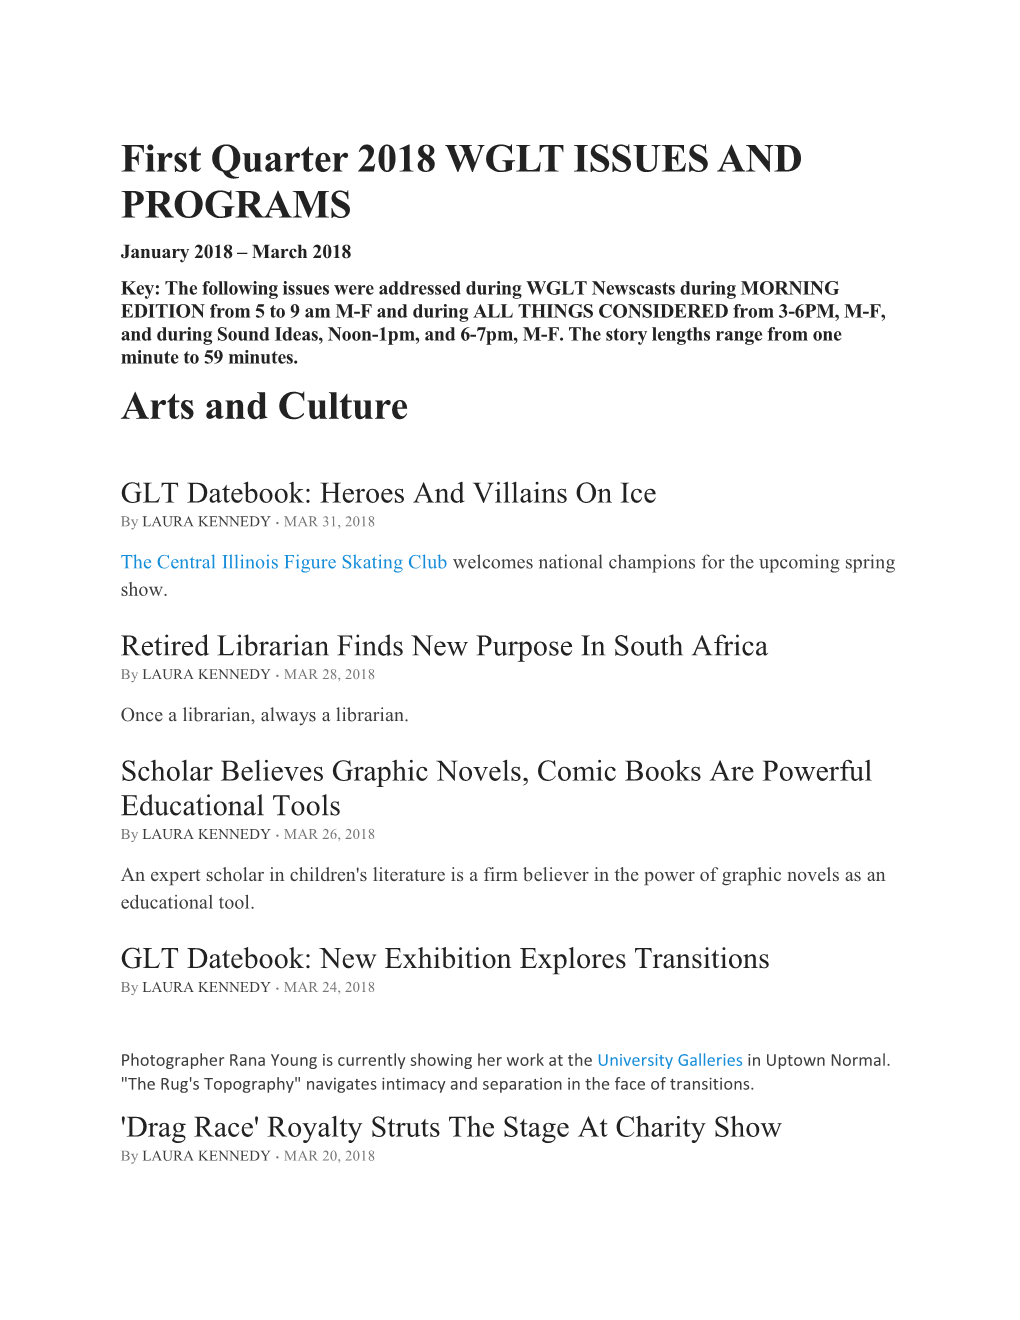 First Quarter 2018 WGLT ISSUES and PROGRAMS Arts and Culture